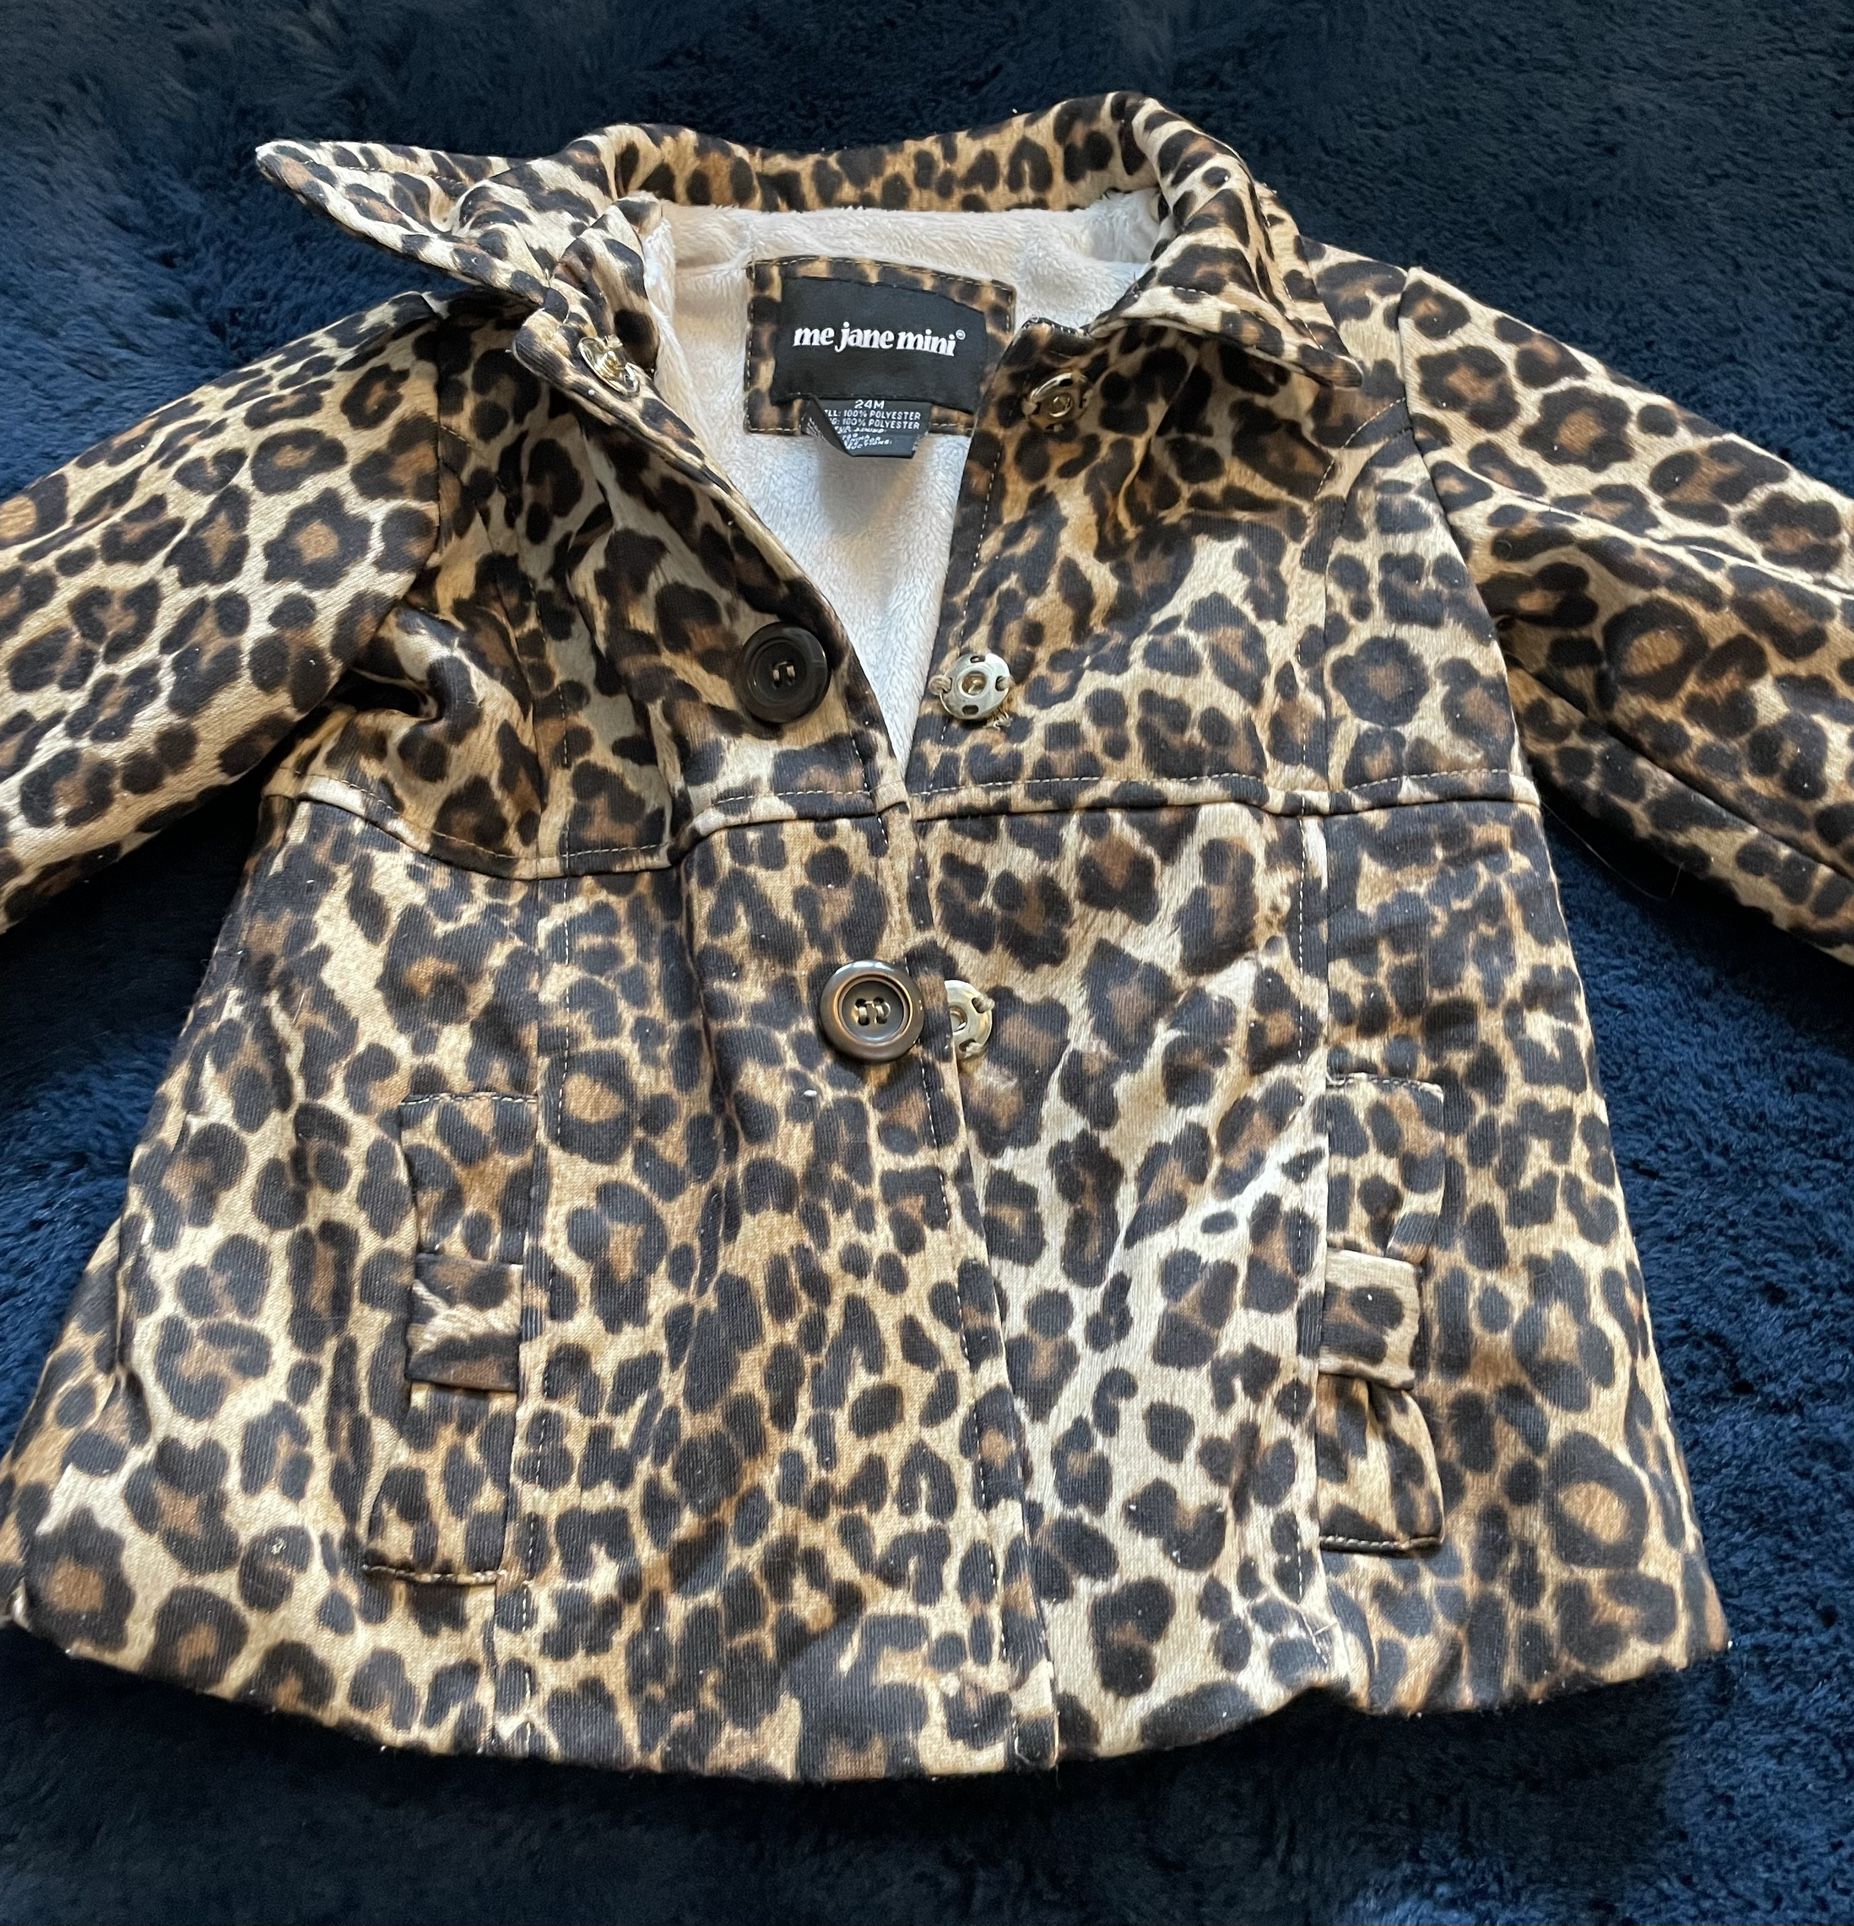 24 Months Spring/Fall Jacket $10 